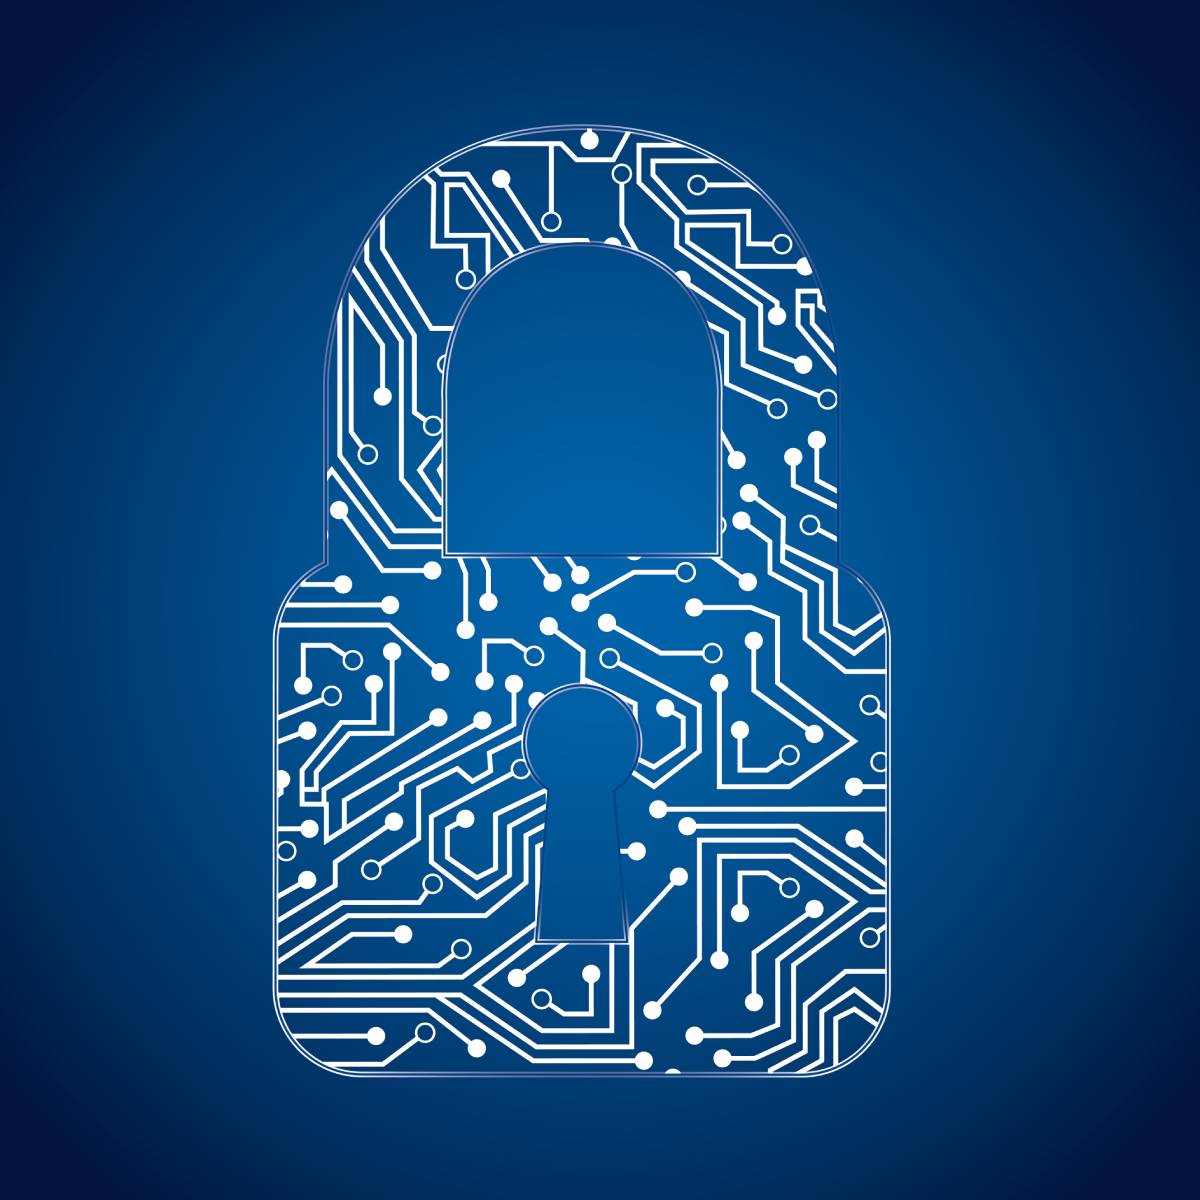 Digital representation of a padlock on a blue background keeping your business safe from a disater